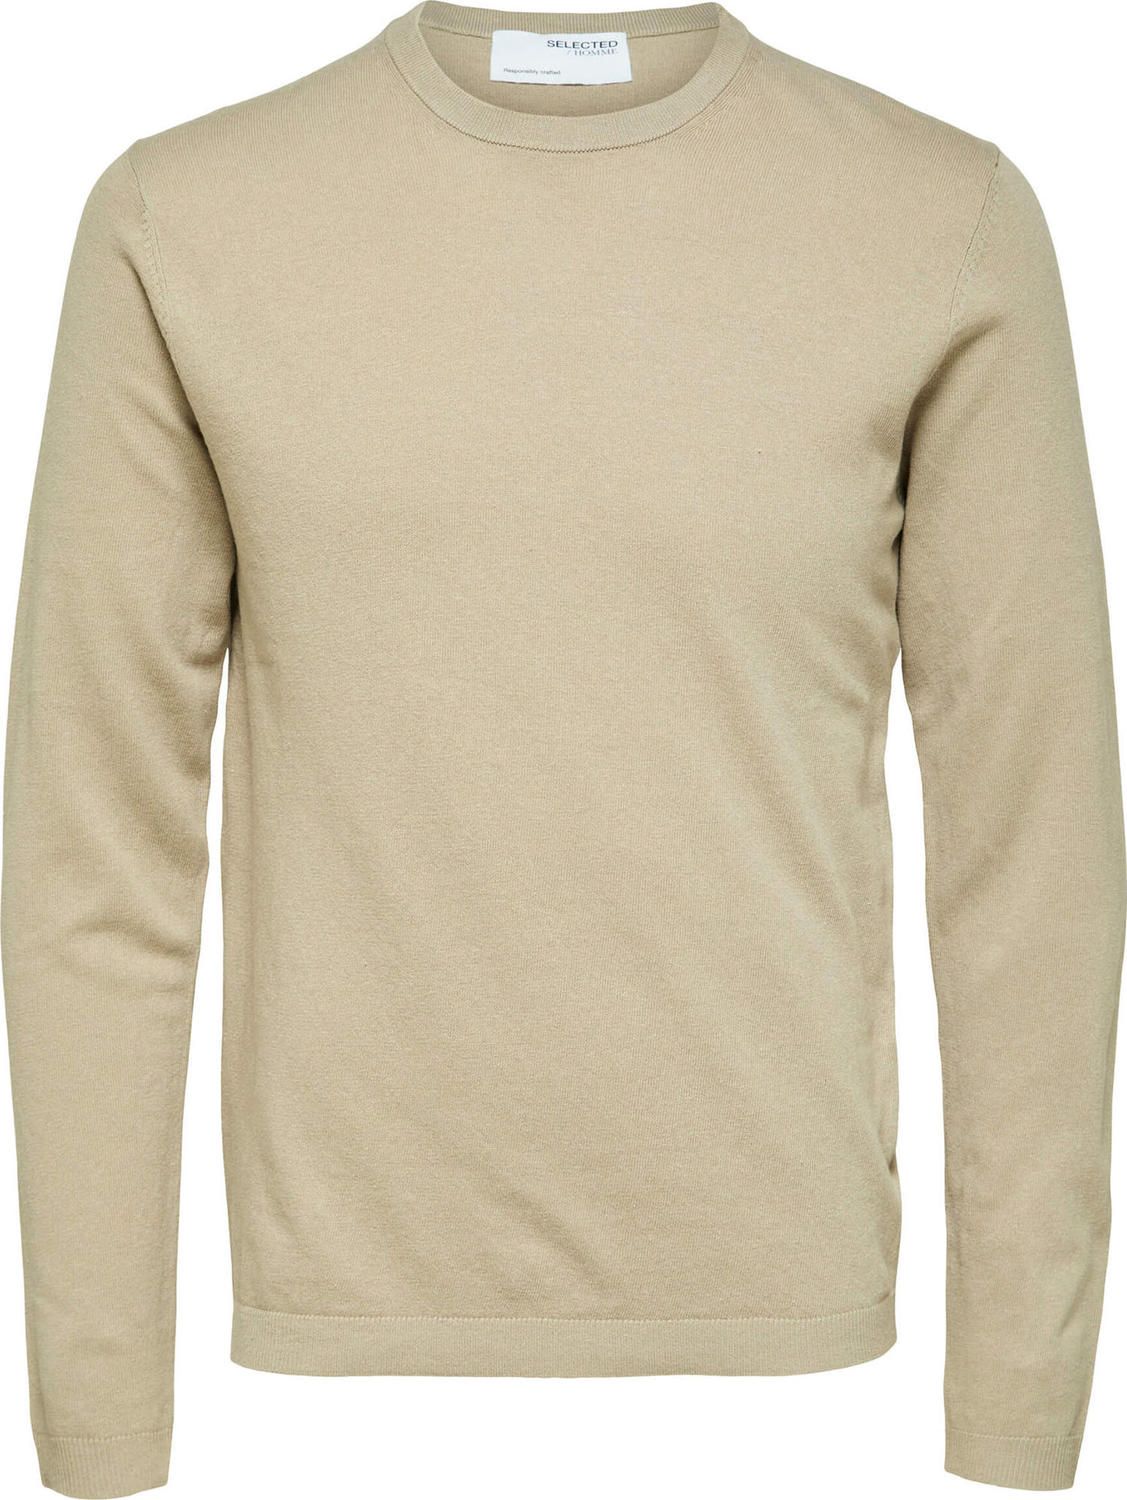 Selected Homme Pullover Beige 